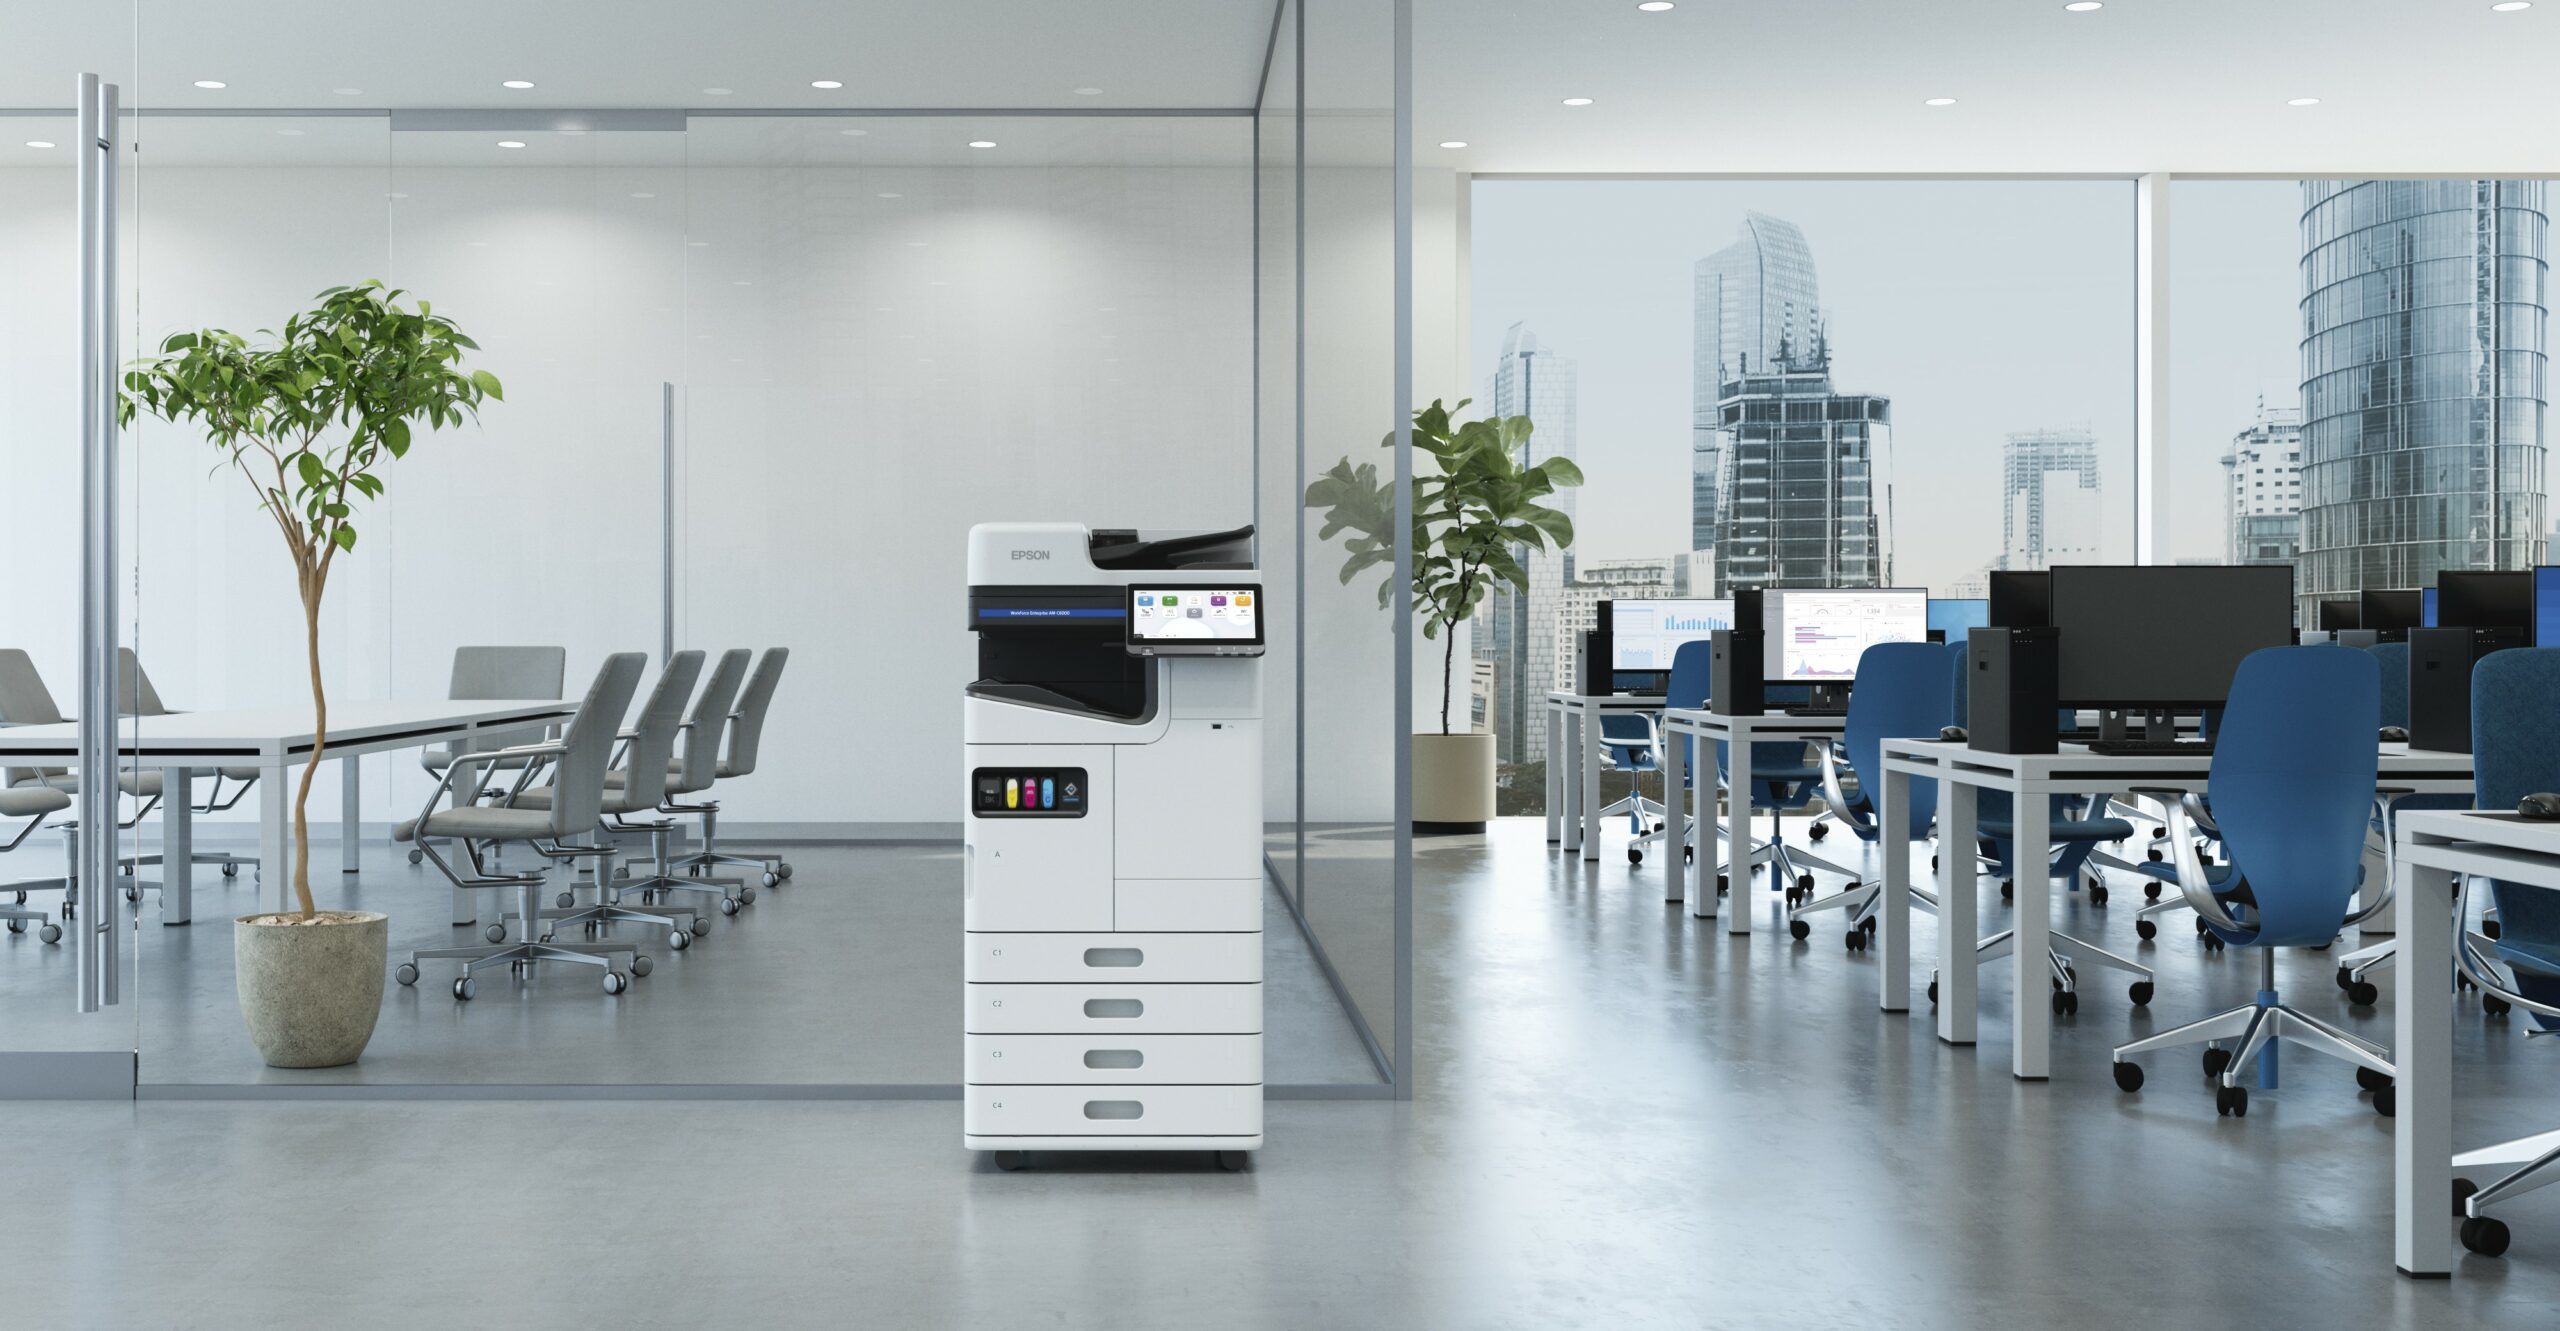 Epson Brings Industry-Disruptive PrecisionCore Technology to Office Printing with New Compact WorkForce Enterprise AM Series